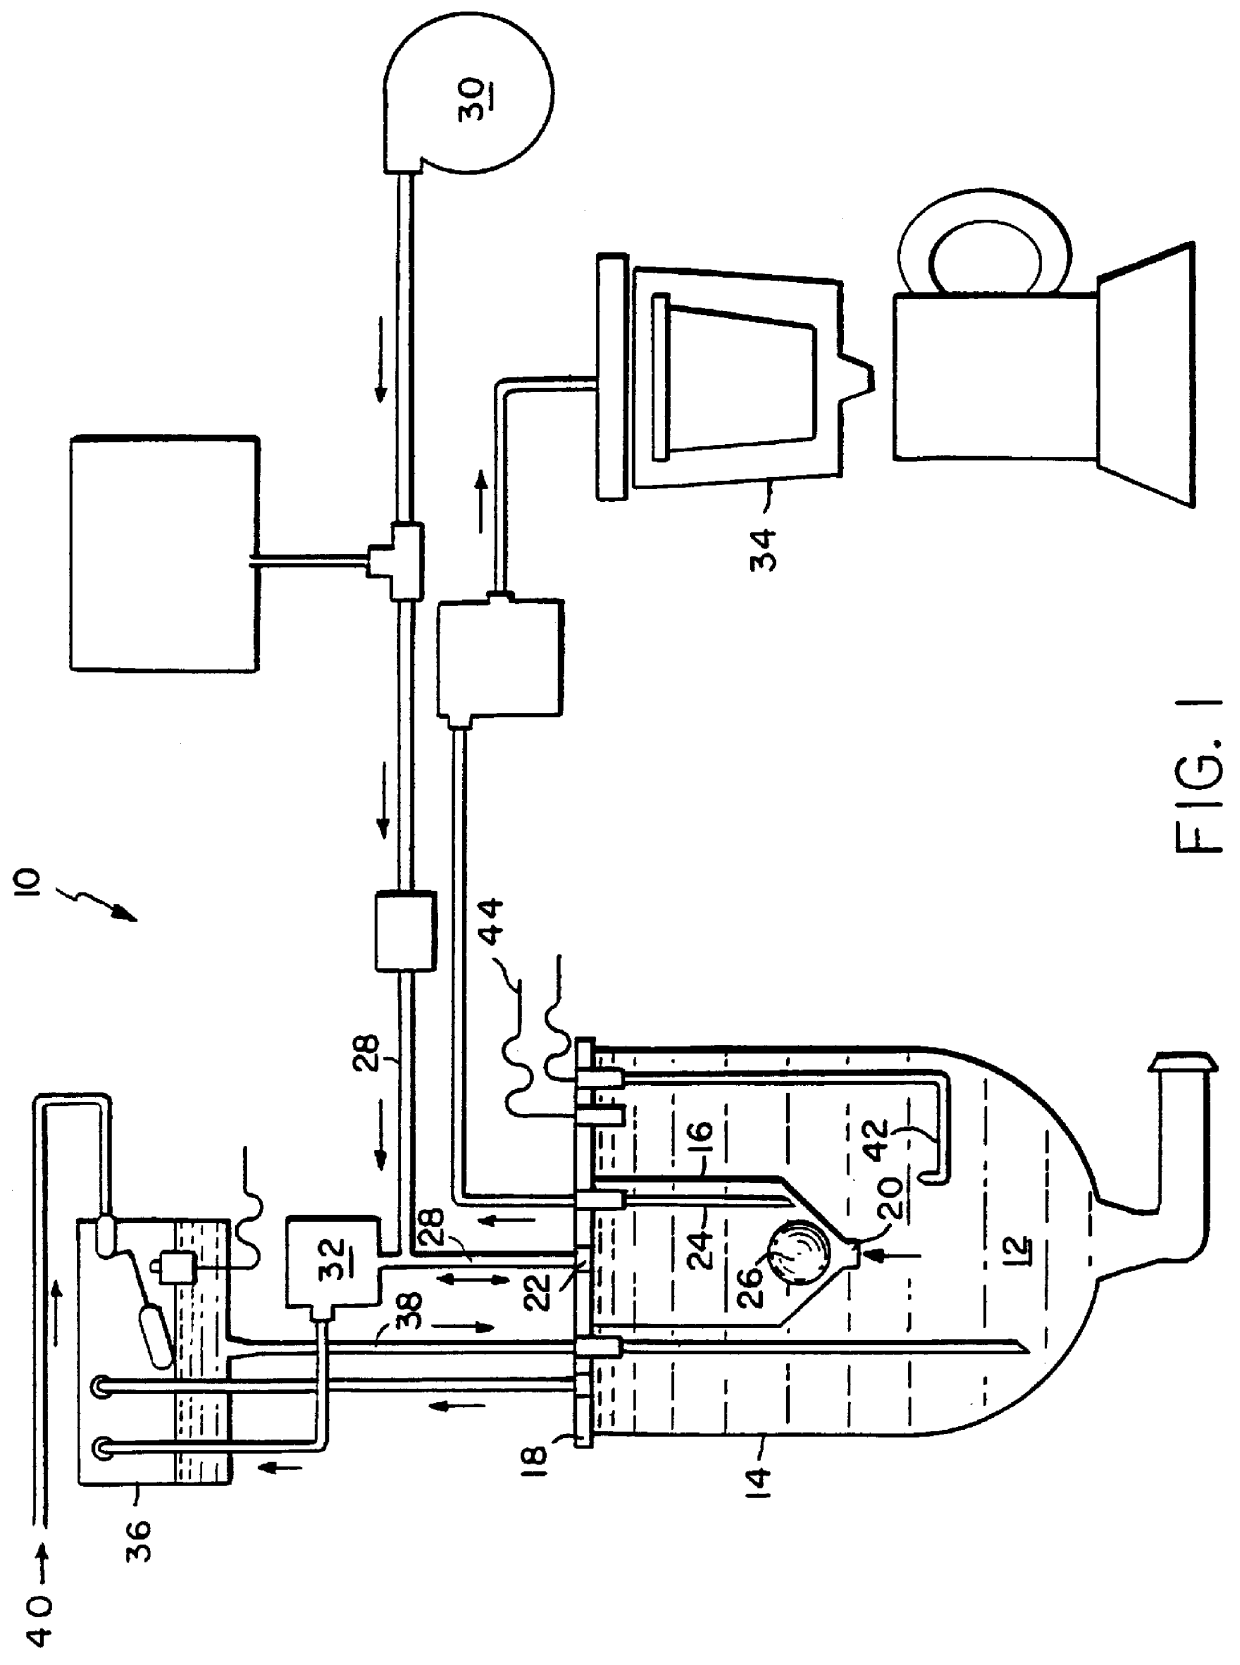 Apparatus for consecutively dispensing an equal volume of liquid